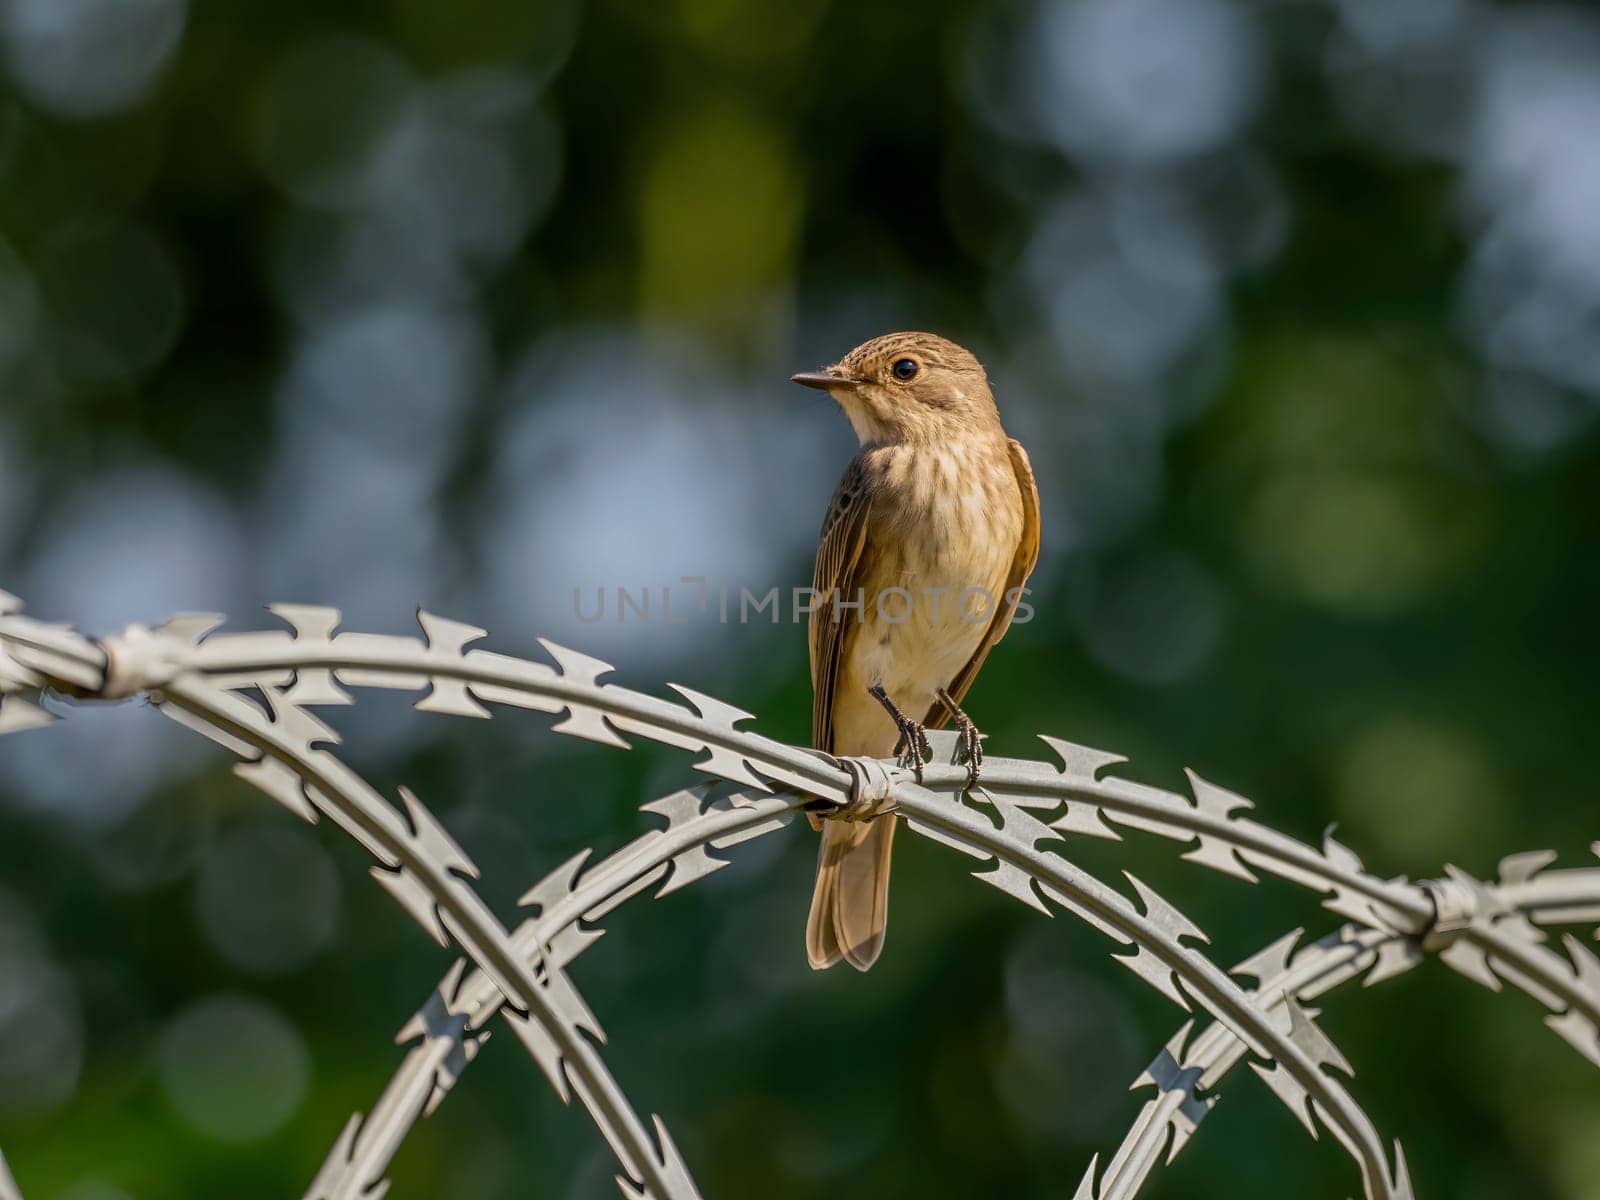 Spotted flycatcher sitting on a chain, smudged greenery in the background.Wildlife photo!